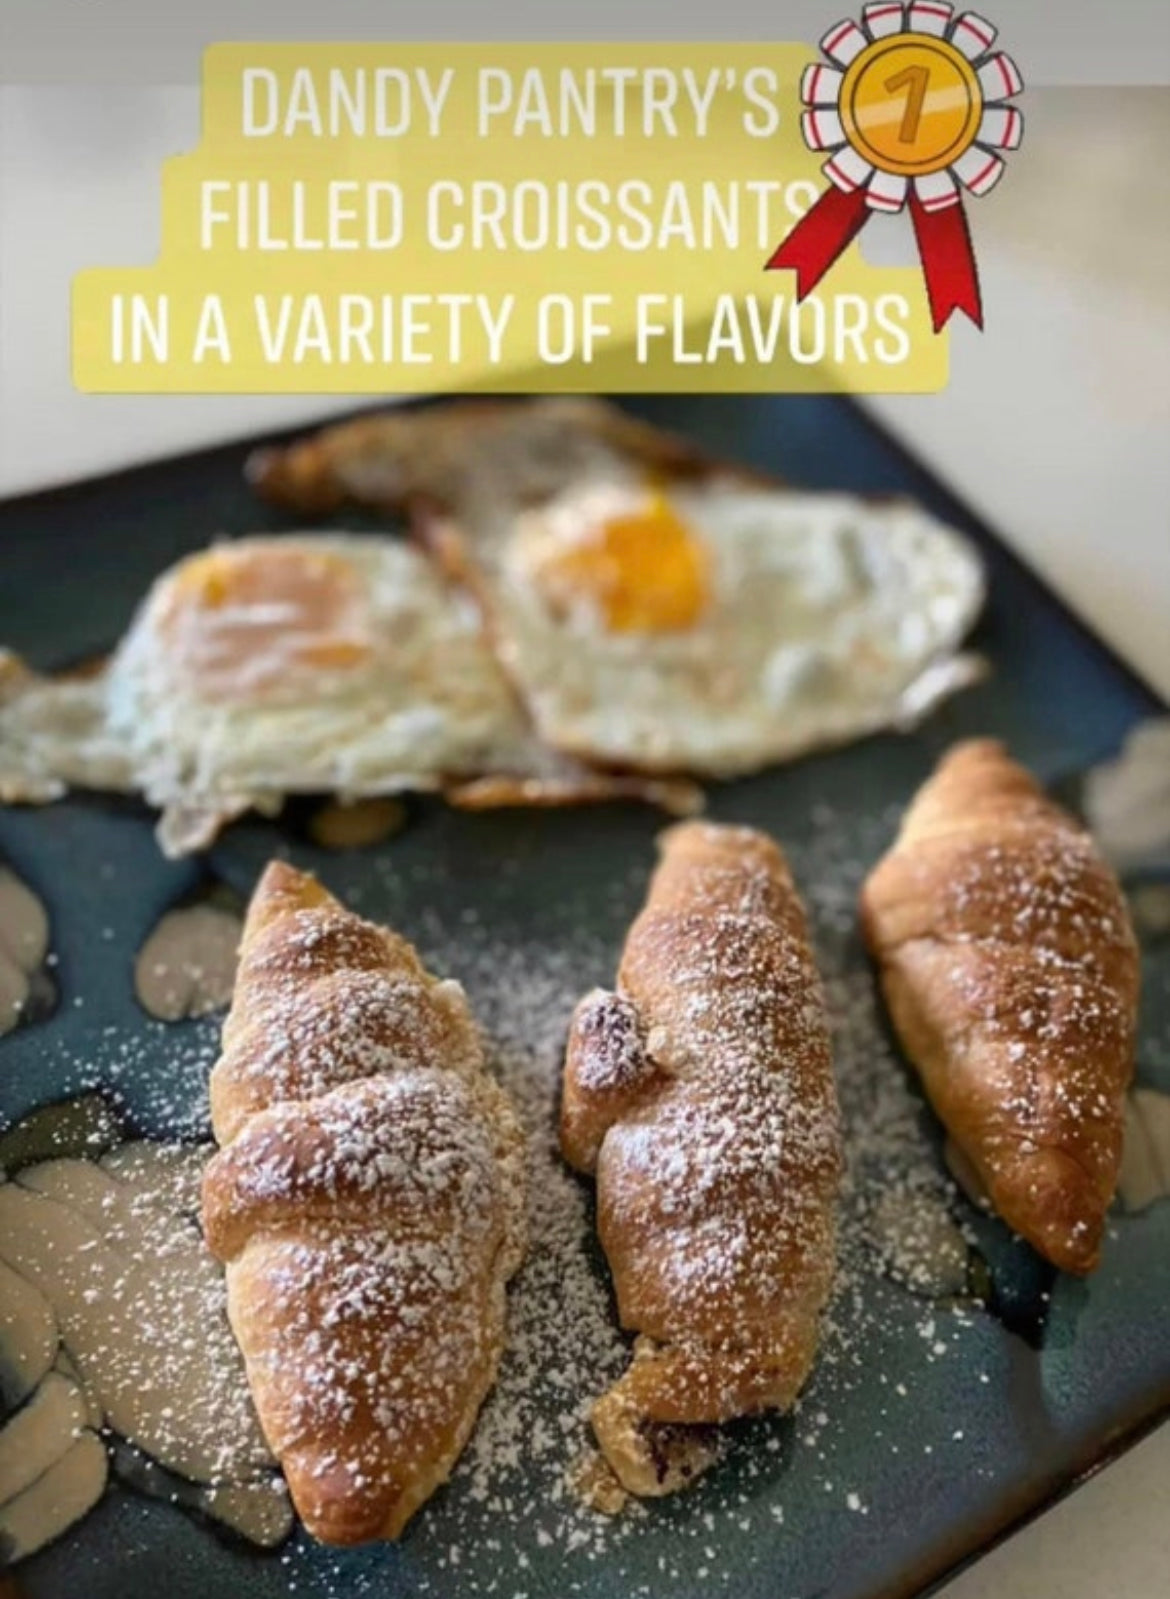 14 ALL-IN Variety Flavored Croissants